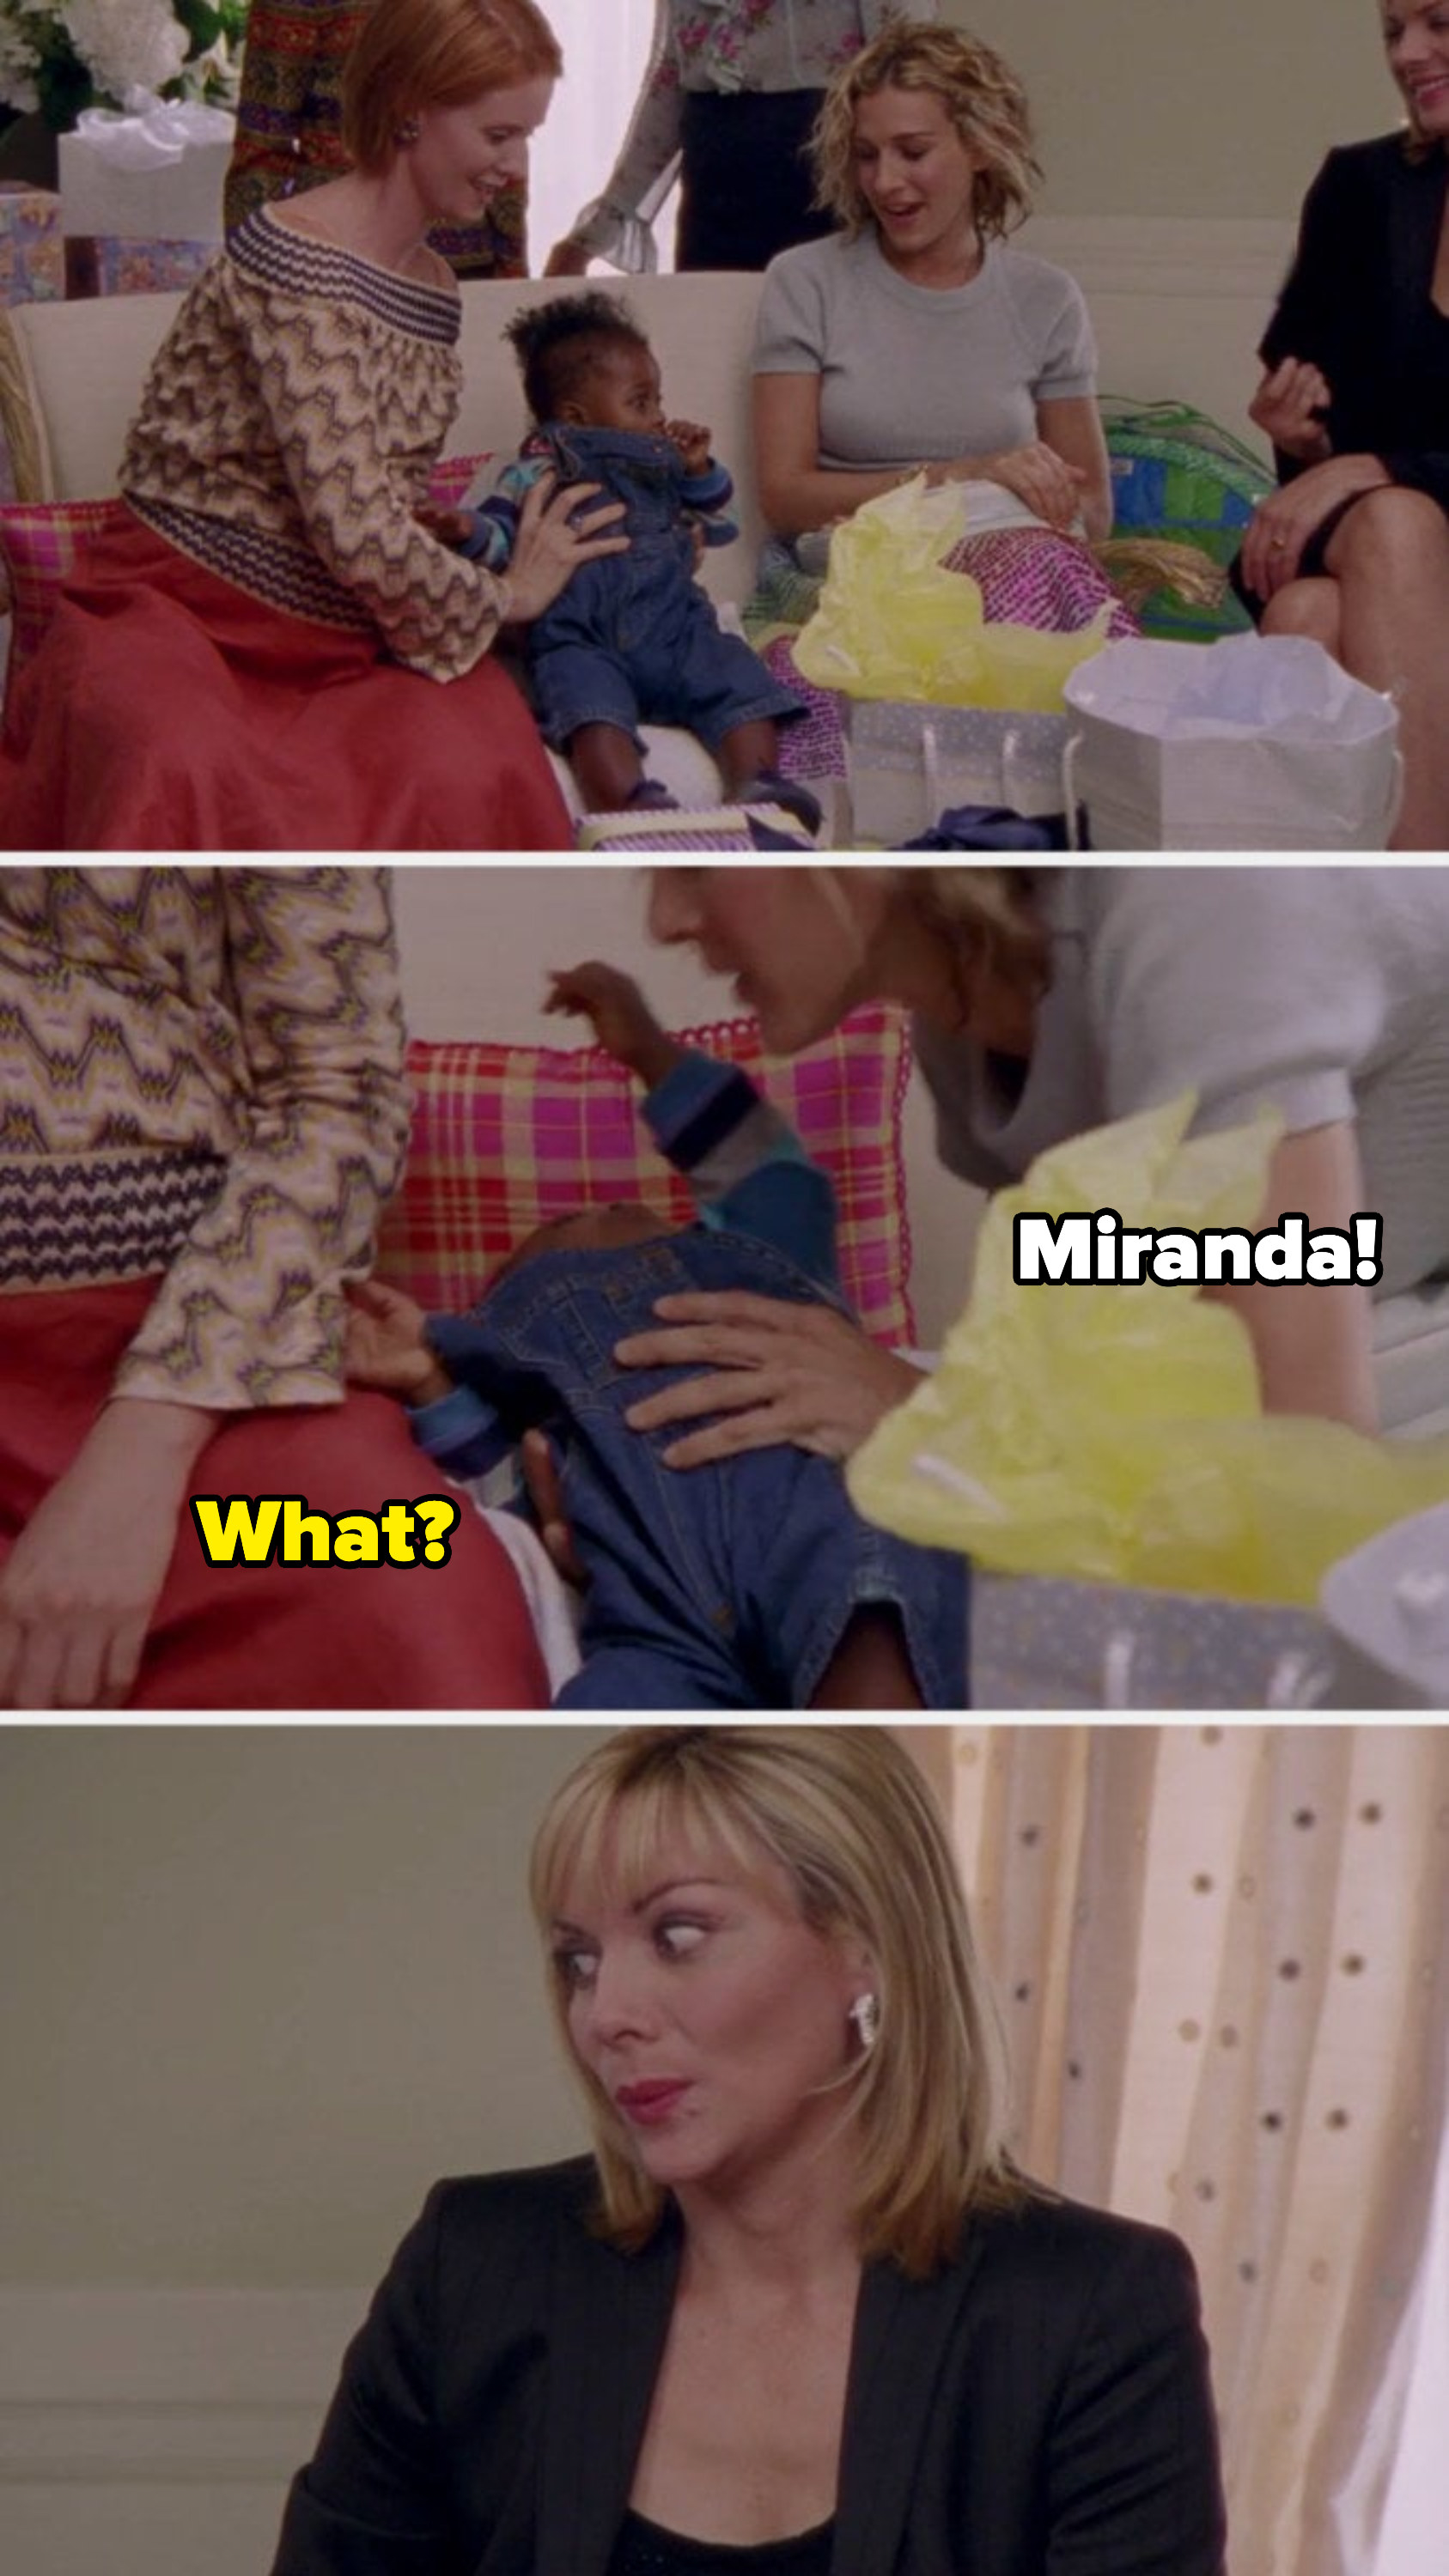 Carrie yelling at Miranda while her coworker&#x27;s baby is slipping off the couch, Samantha reacting in a shocked way